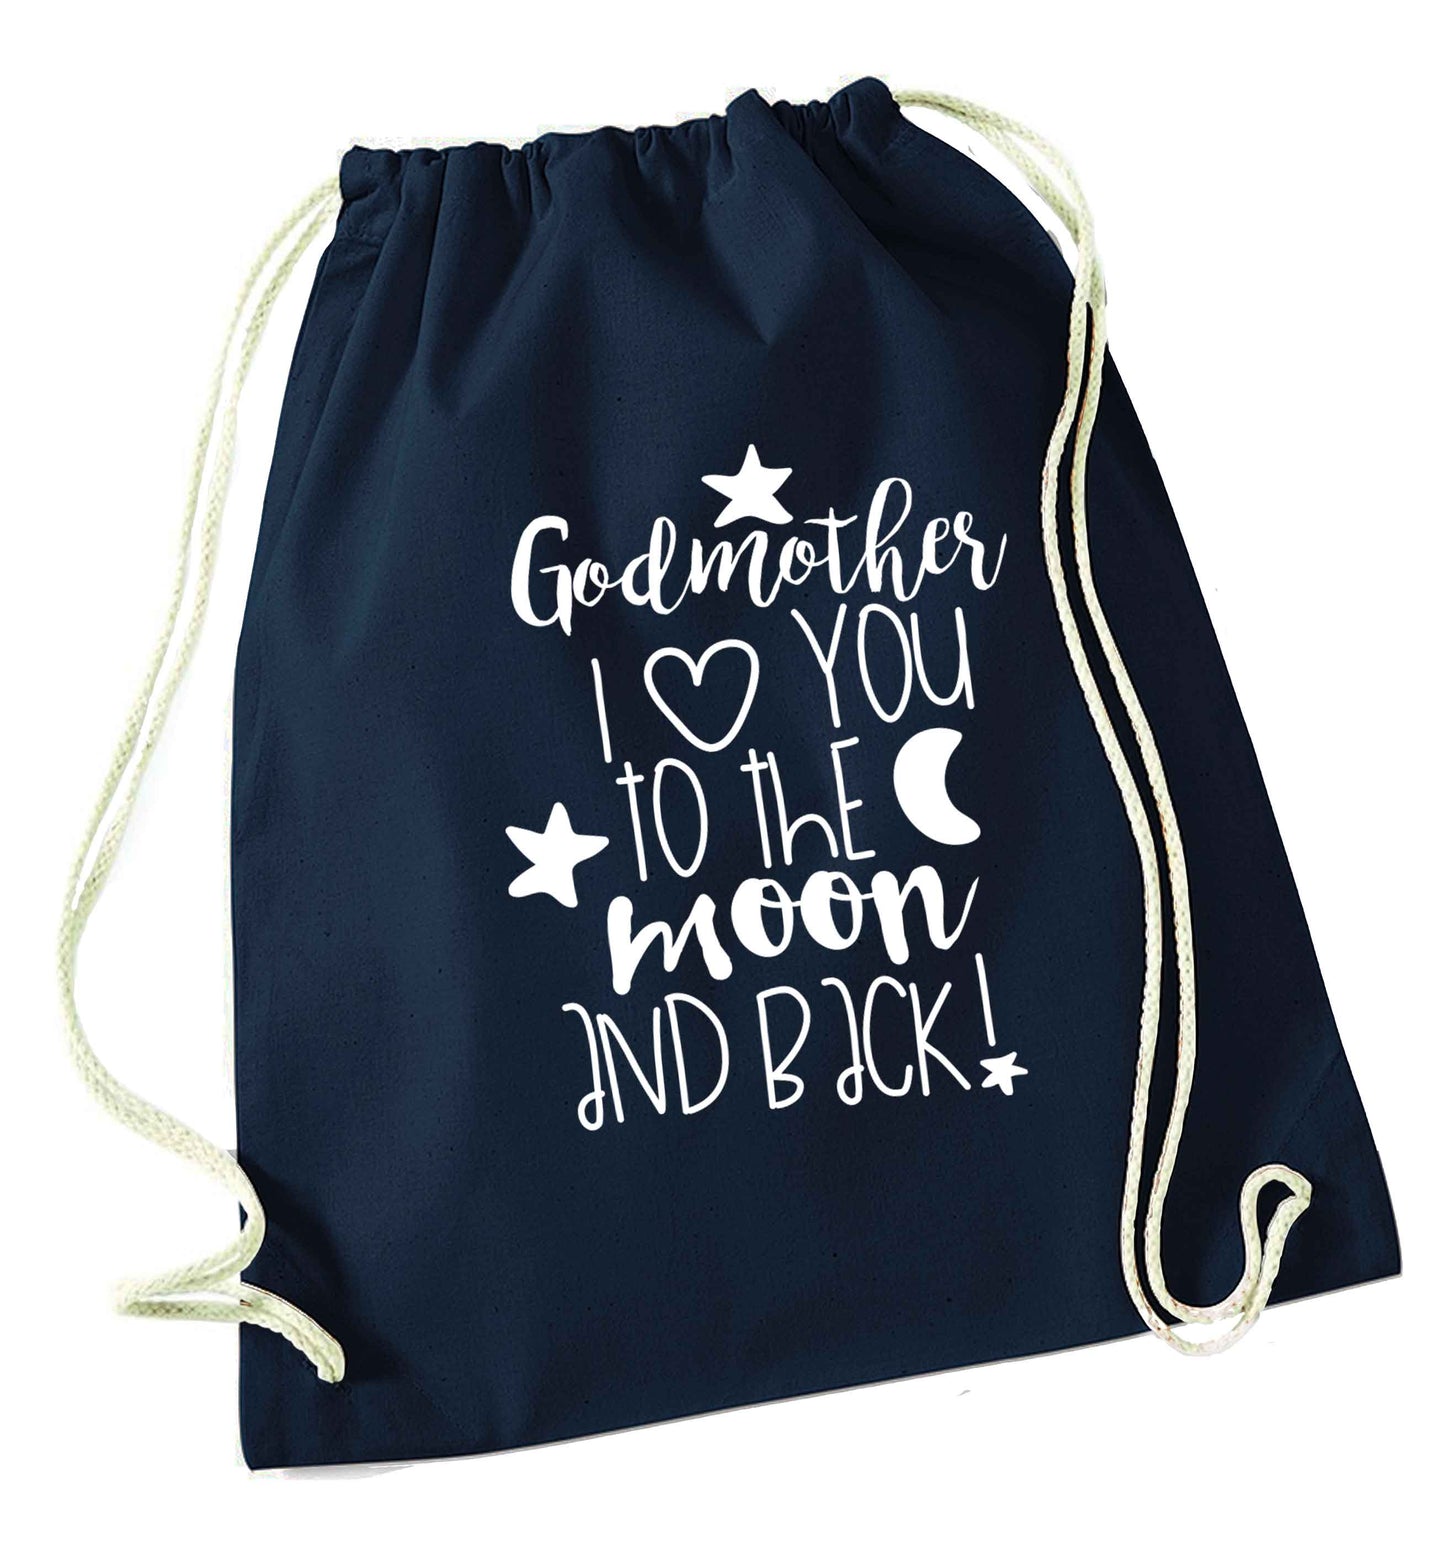 Godmother I love you to the moon and back navy drawstring bag